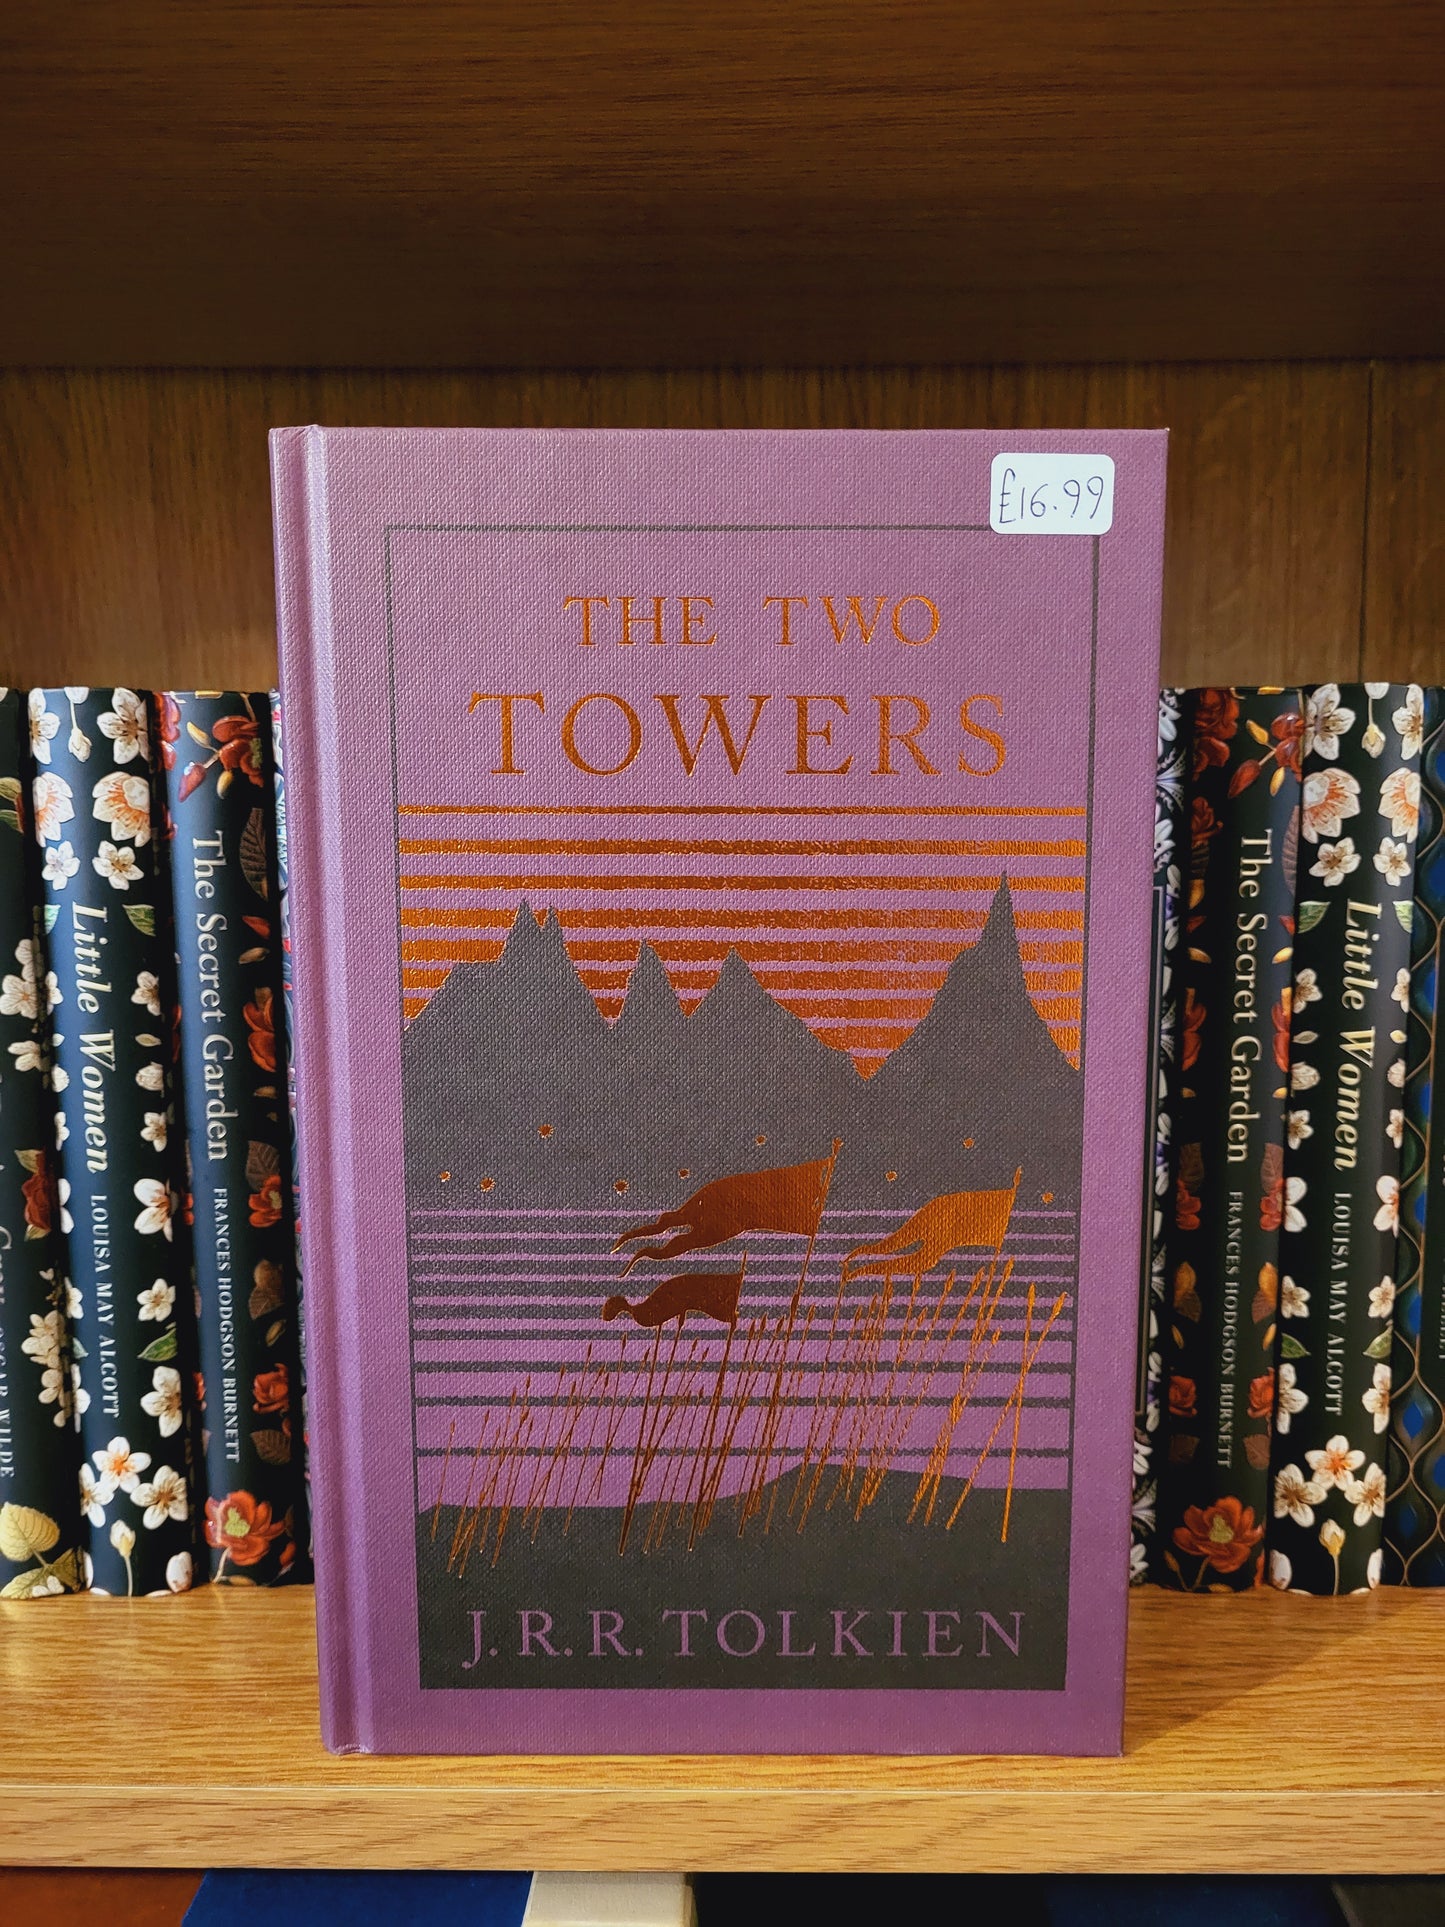 The Two Towers - J.R.R. Tolkien (Clothbound)